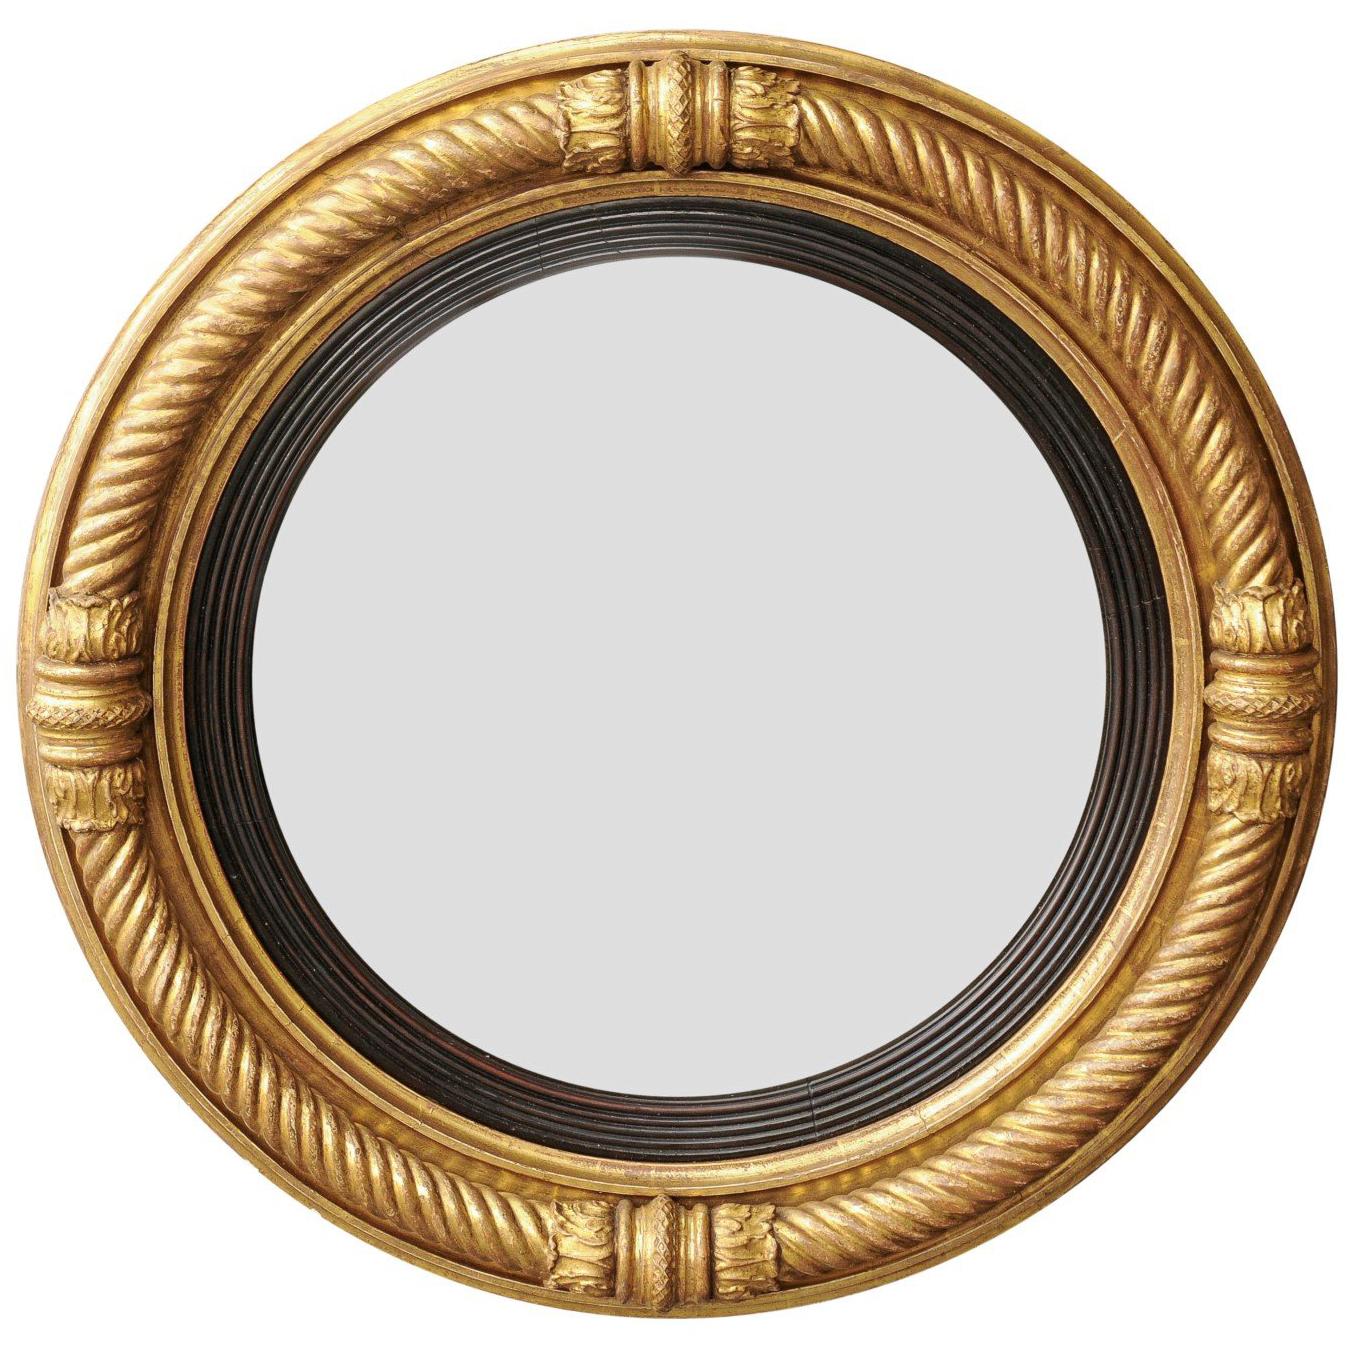 English Georgian Period 1820s Giltwood Convex Mirror with Twisted Rope Motifs